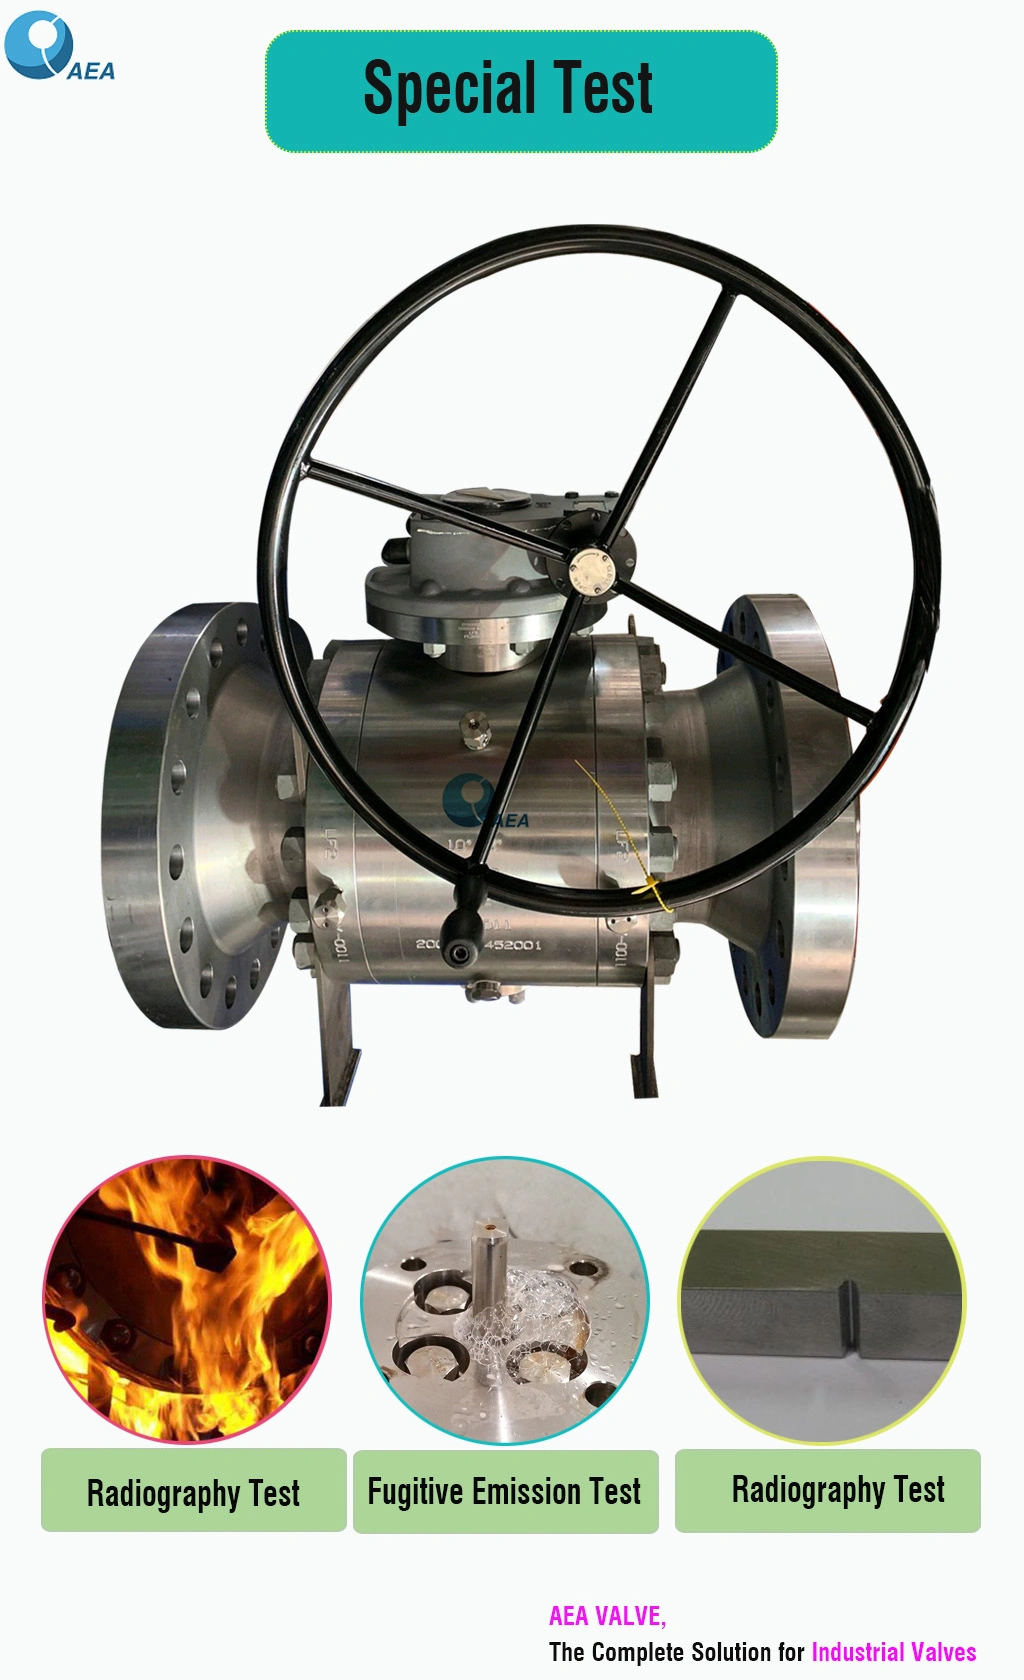 API 608 Forged Carbon Steel A105 A350 Lf2 Bolted Body Zero Leakage Low Fugitive Emission Flange Floating Ball Valve